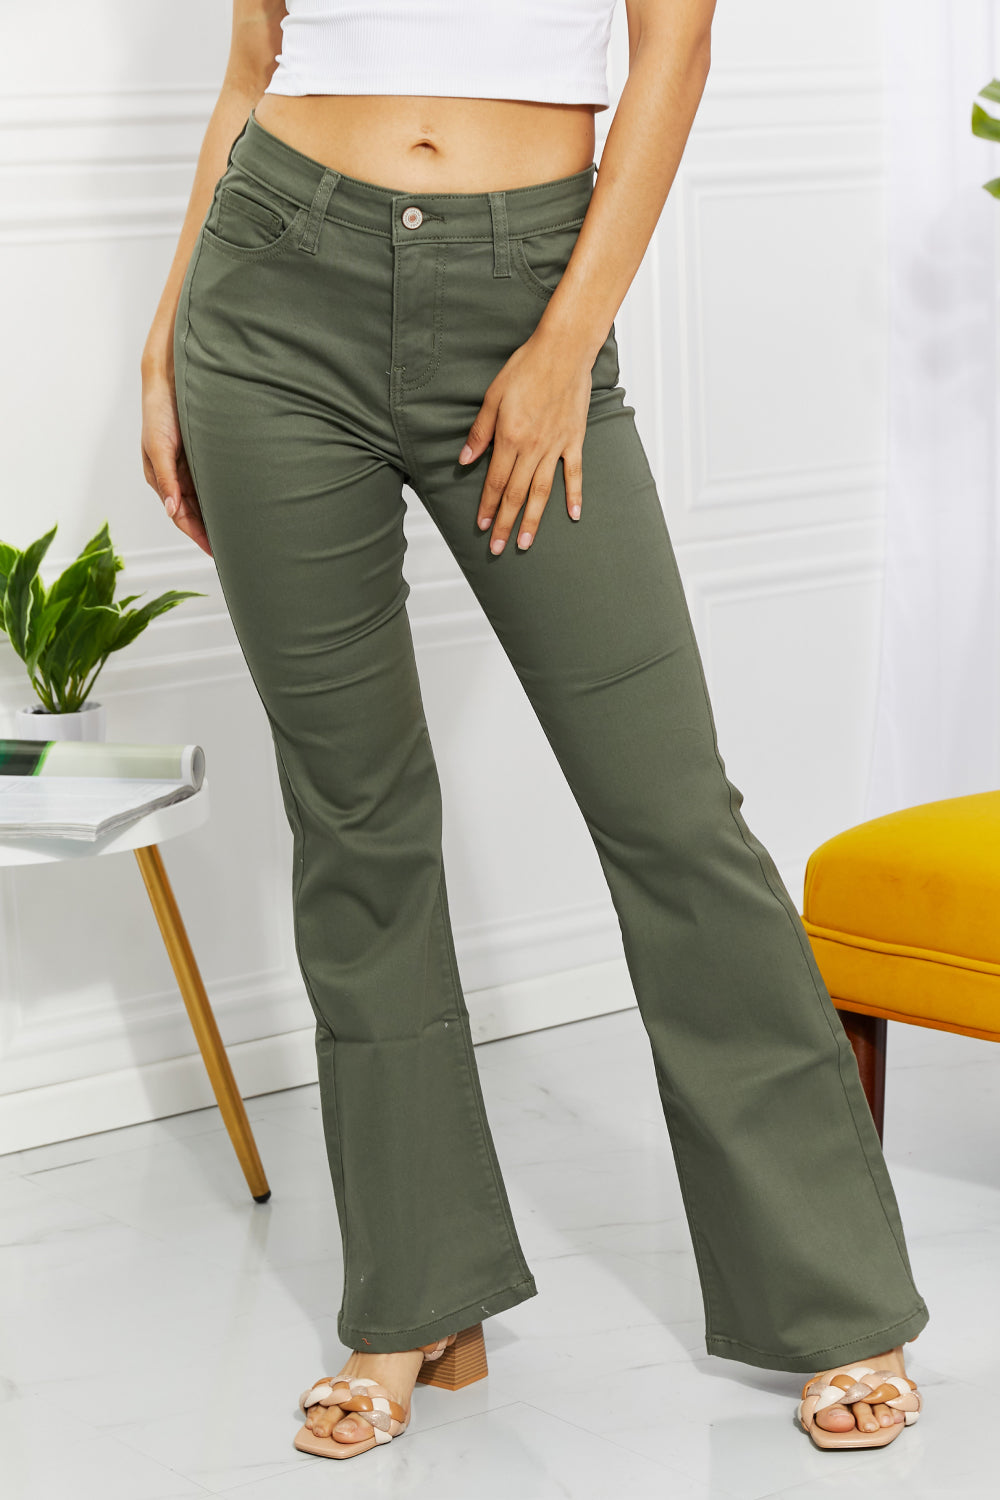 Zenana Clementine Full Size High-Rise Bootcut Jeans in Olive - Jeans - Wild Willows Boutique - Massapequa, NY, affordable and fashionable clothing for women of all ages. Bottoms, tops, dresses, intimates, outerwear, sweater, shoes, accessories, jewelry, active wear, and more // Wild Willow Boutique.